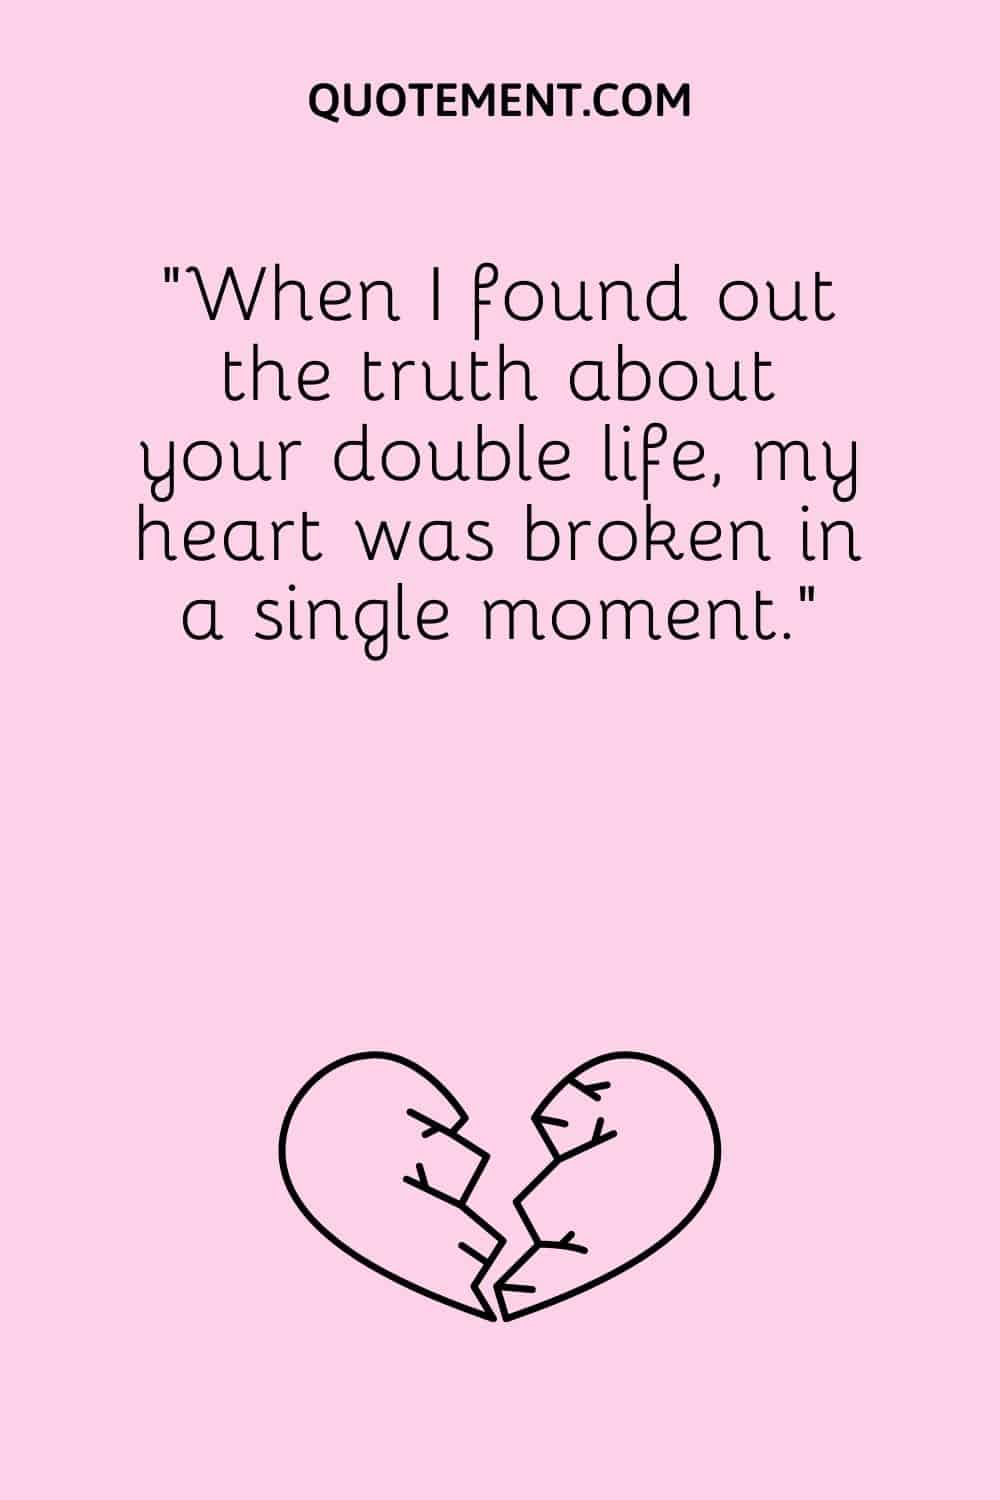 “When I found out the truth about your double life, my heart was broken in a single moment.”